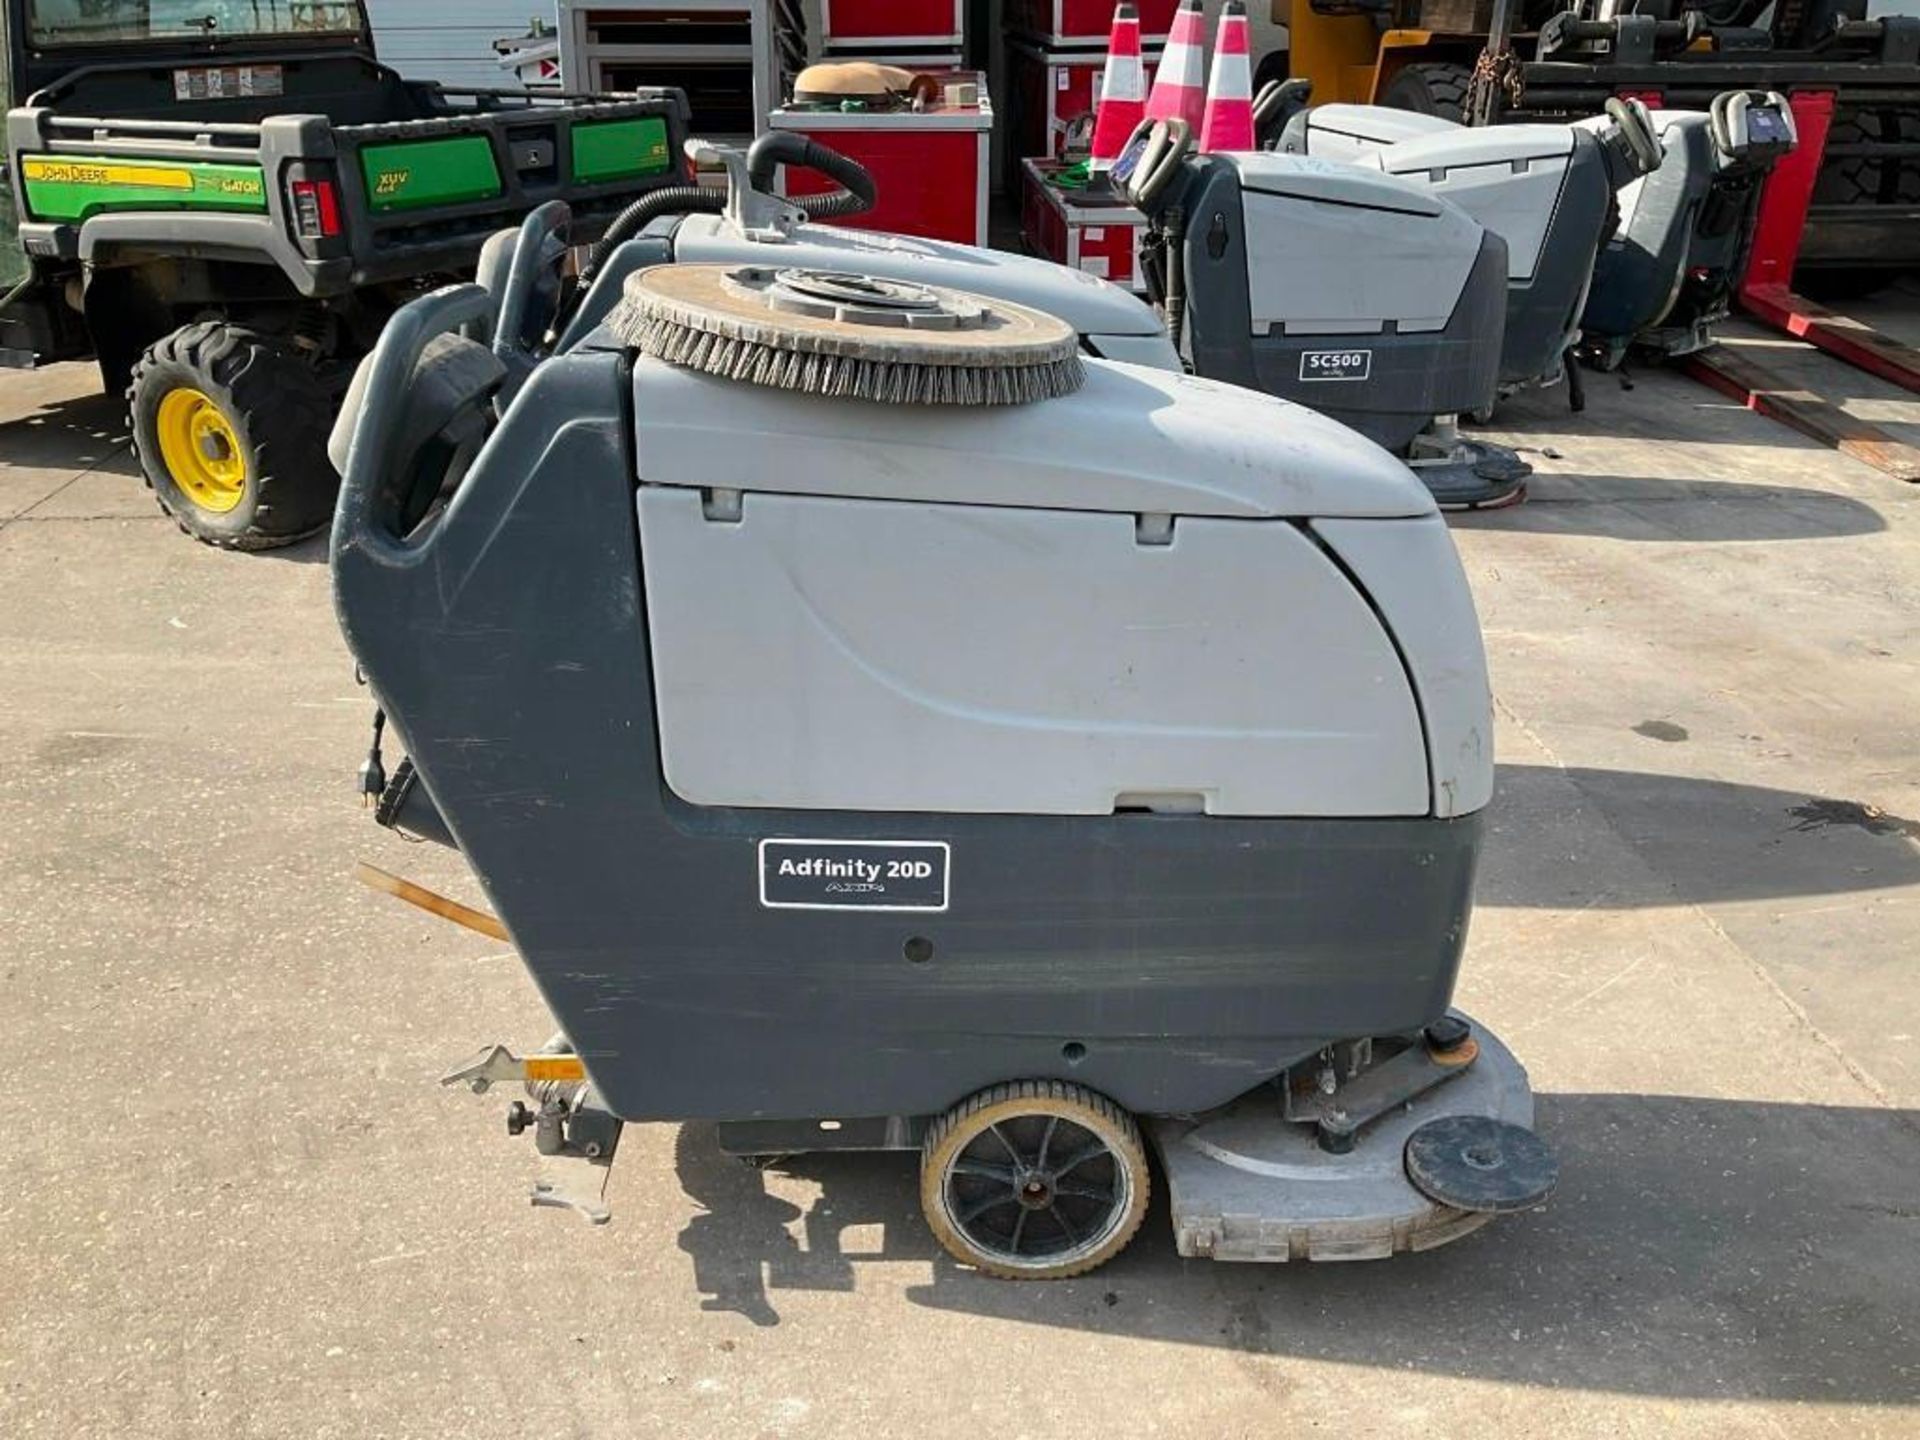 ( 2 ) NILFISK ADVANCE WALK BEHIND FLOOR SCRUBBER MODEL AXP ADFINITY X20D, ELECTRIC, APPROX 24 VOLTS, - Image 2 of 16